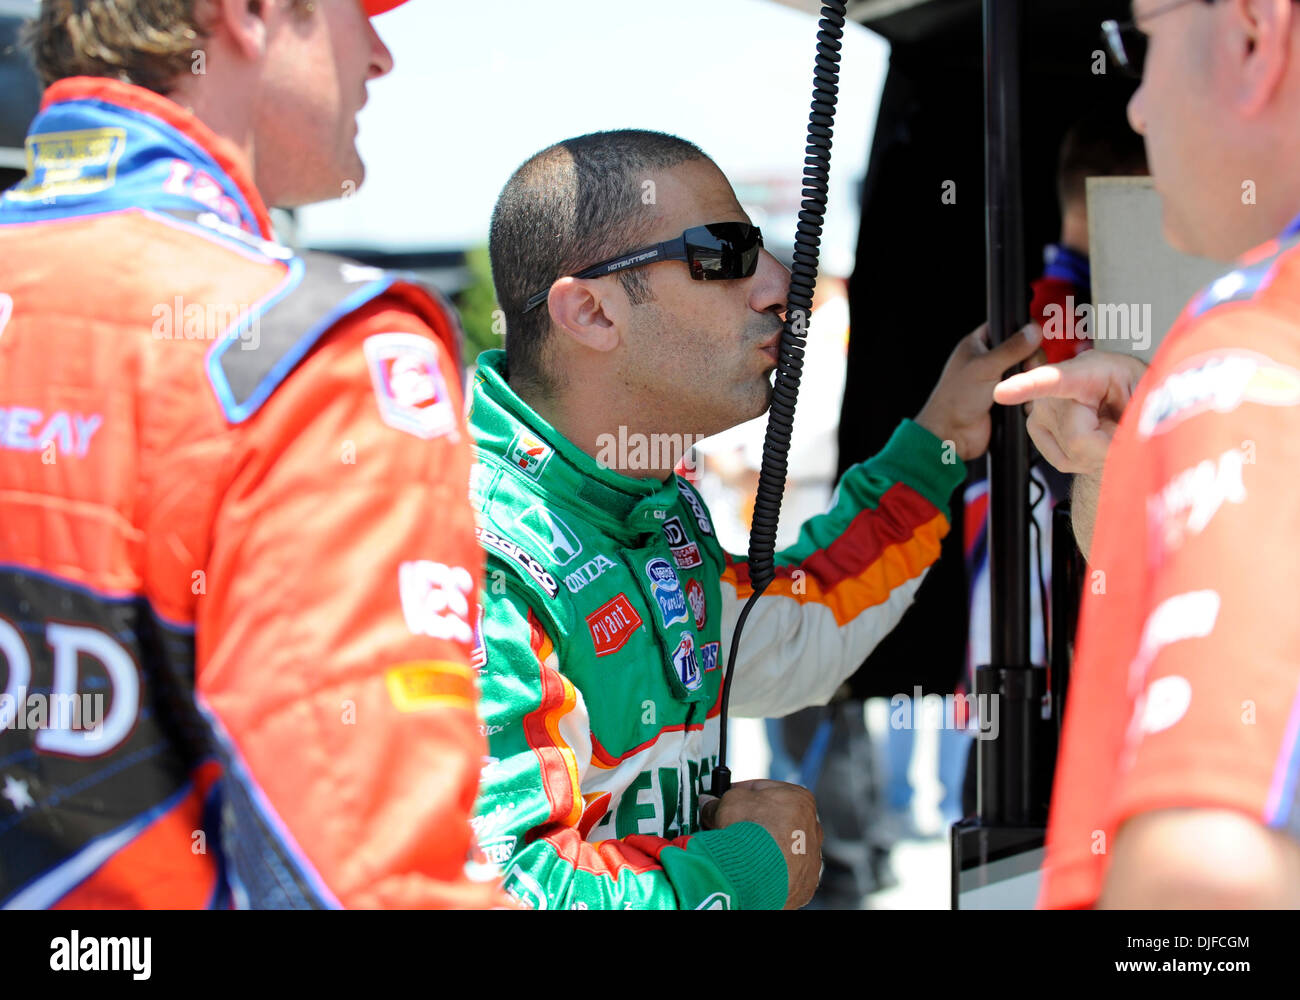 Tony Kanaan of Andretti Autosport kisses a cord after qualifying at the IZOD IndyCar Series Firestone 550k at Texas Motor Speedway in Fort Worth, Texas (Credit Image: © Albert Pena/Southcreek Global/ZUMApress.com) Stock Photo